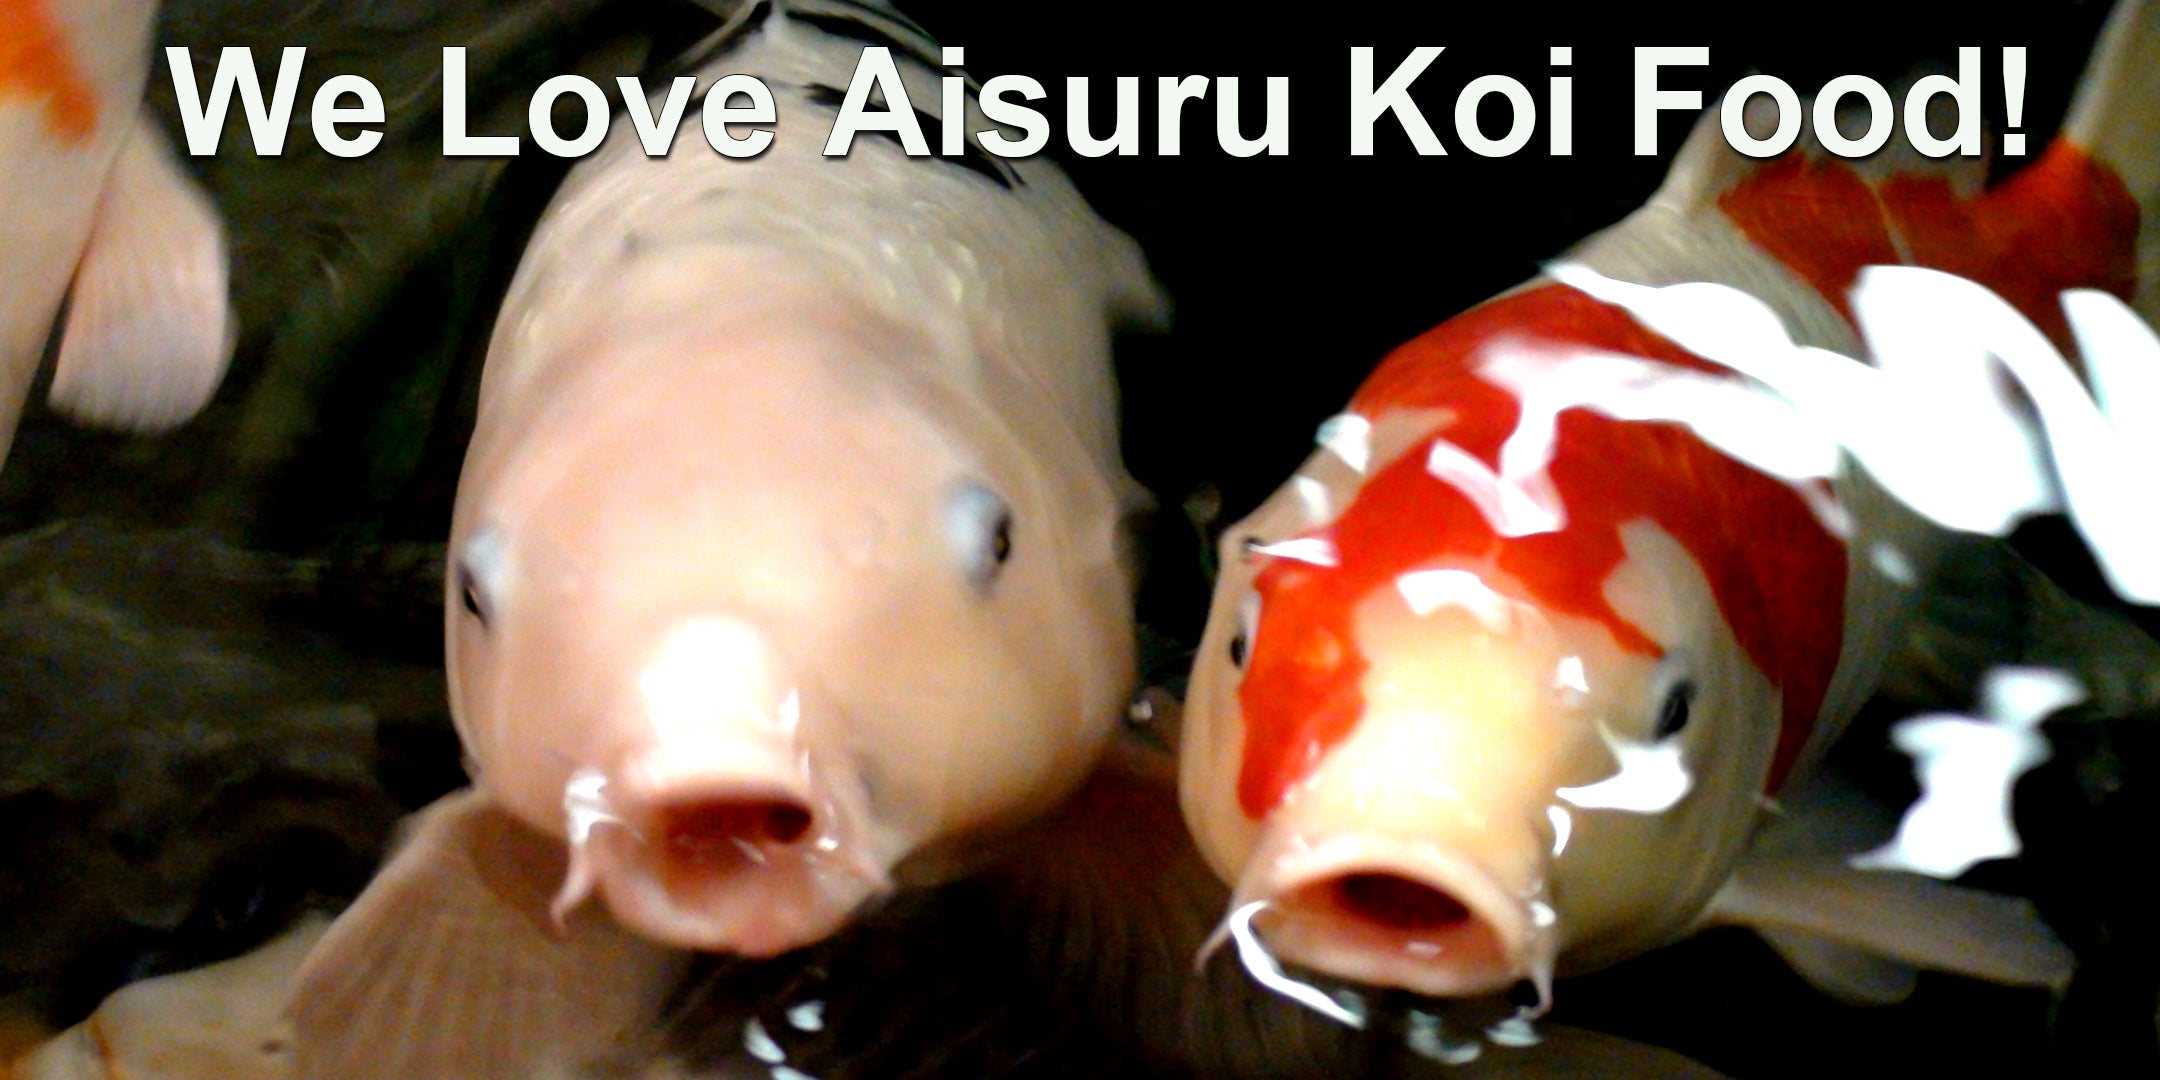 Two large koi fish begging with their mouths open for more Aisure Koi premium koi food